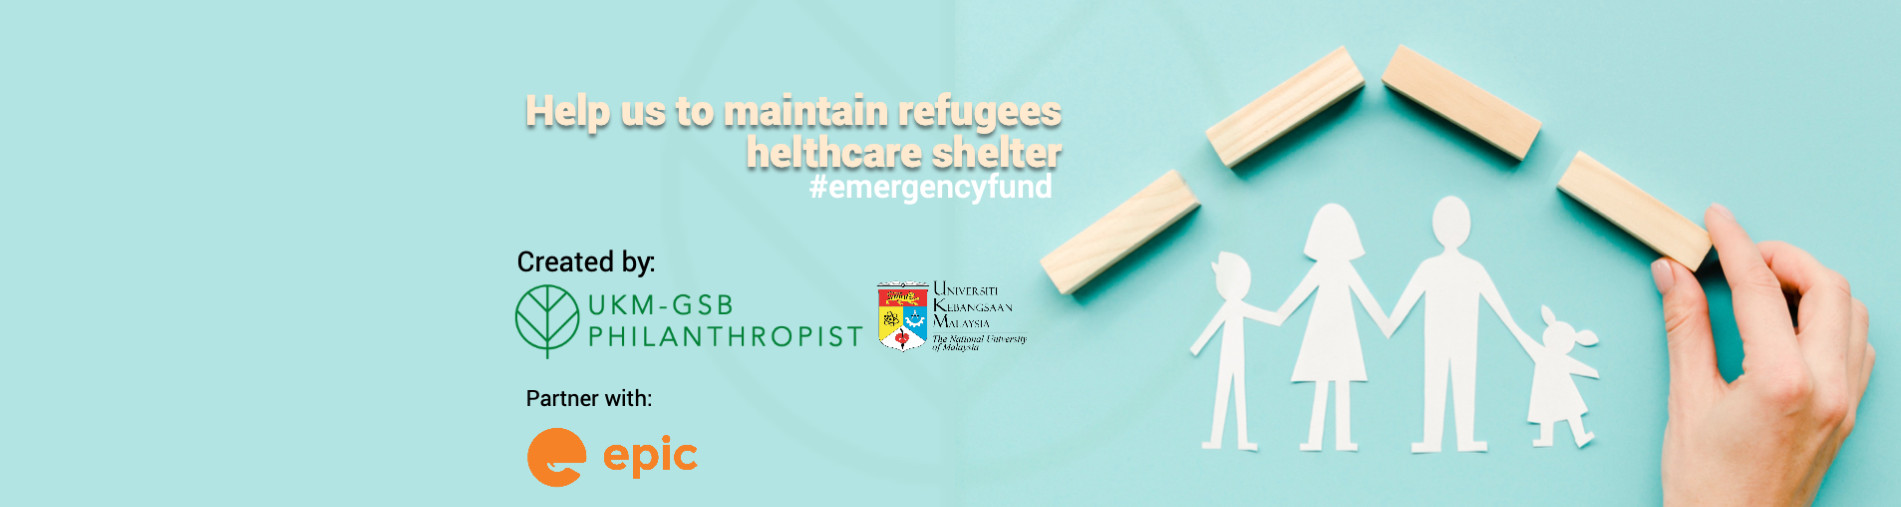 HELP US TO MAINTAIN REFUGEES HEALTHCARE SHELTER